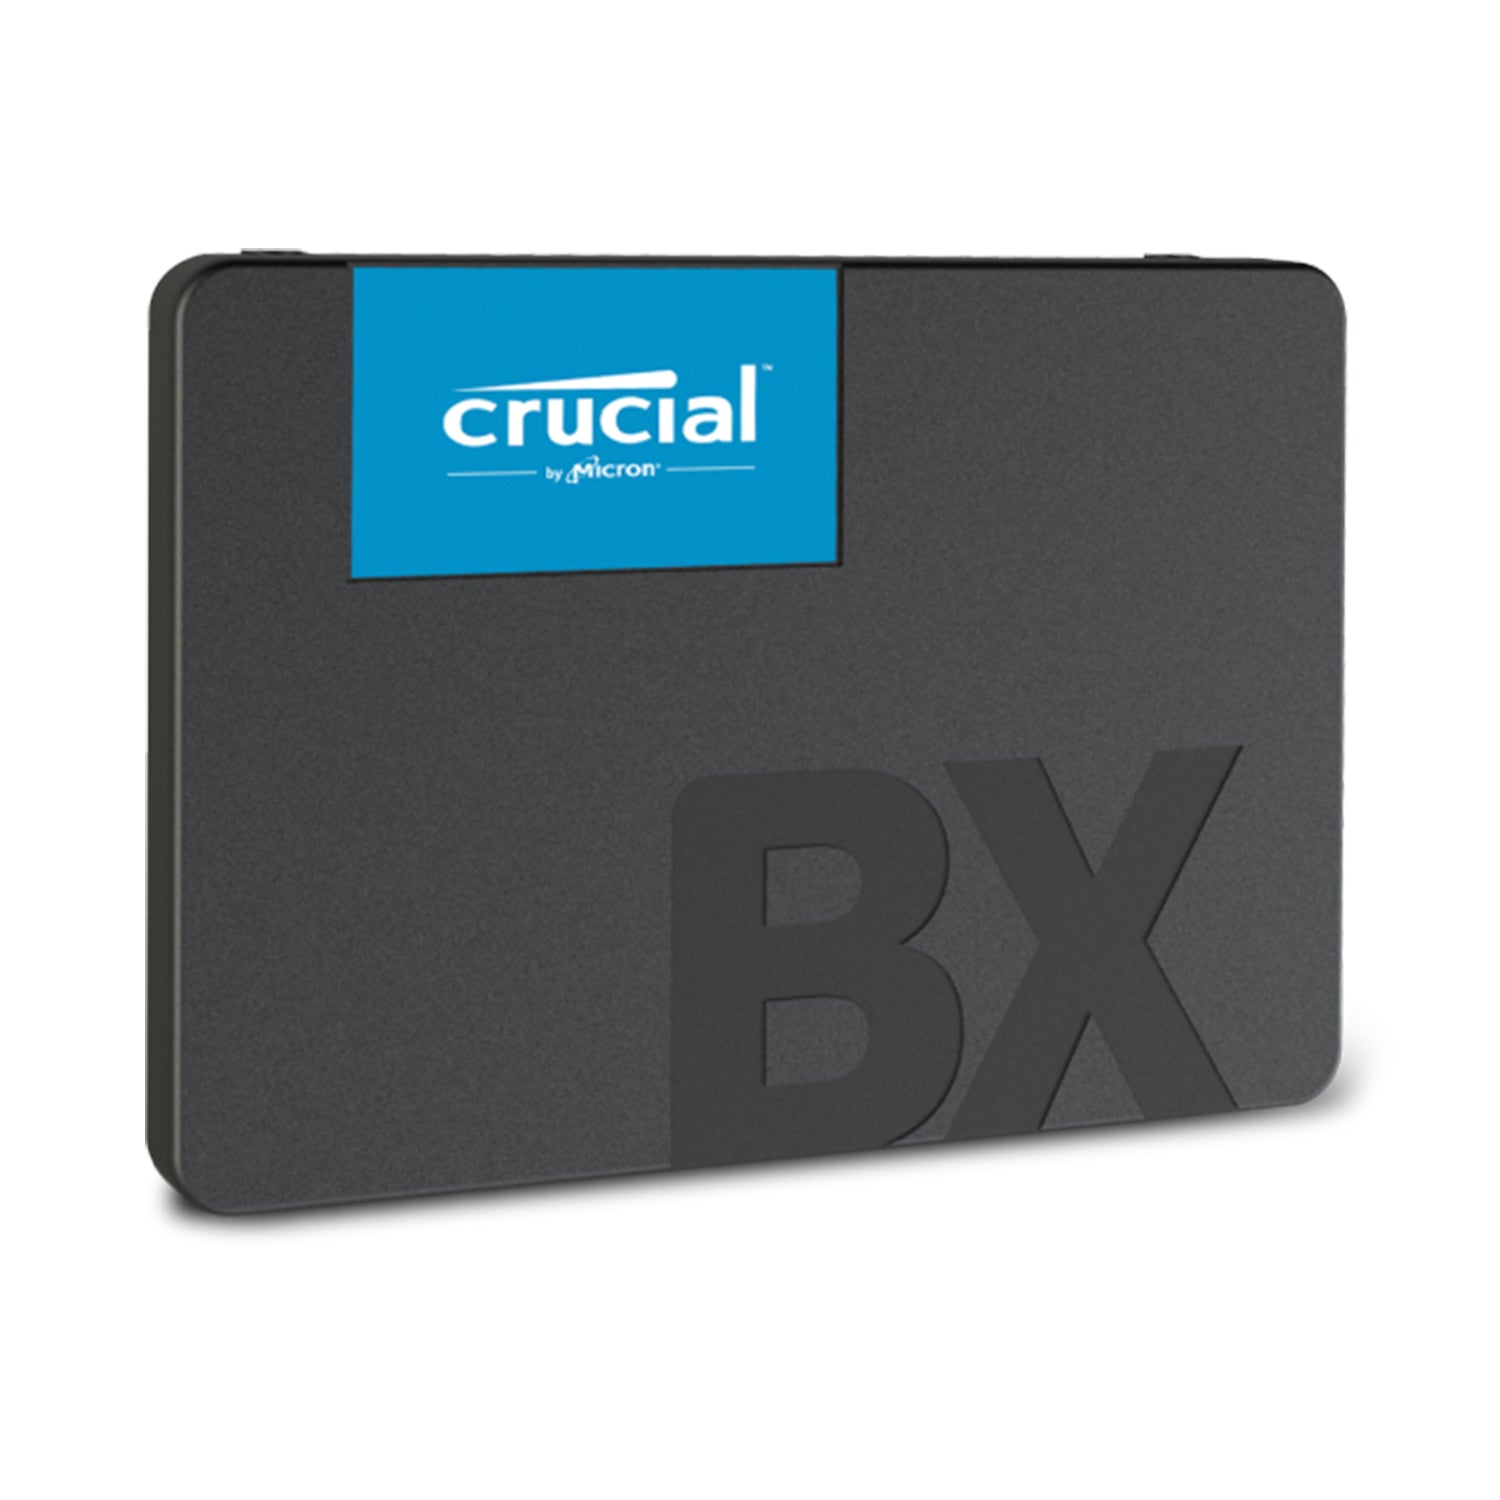 Crucial BX500 2TB SSD | 3D NAND SATA Interface | 2.5 inch Form Factor | up to 540 MB/s read for Laptop or Desktop PC - (CT2000BX500SSD1)